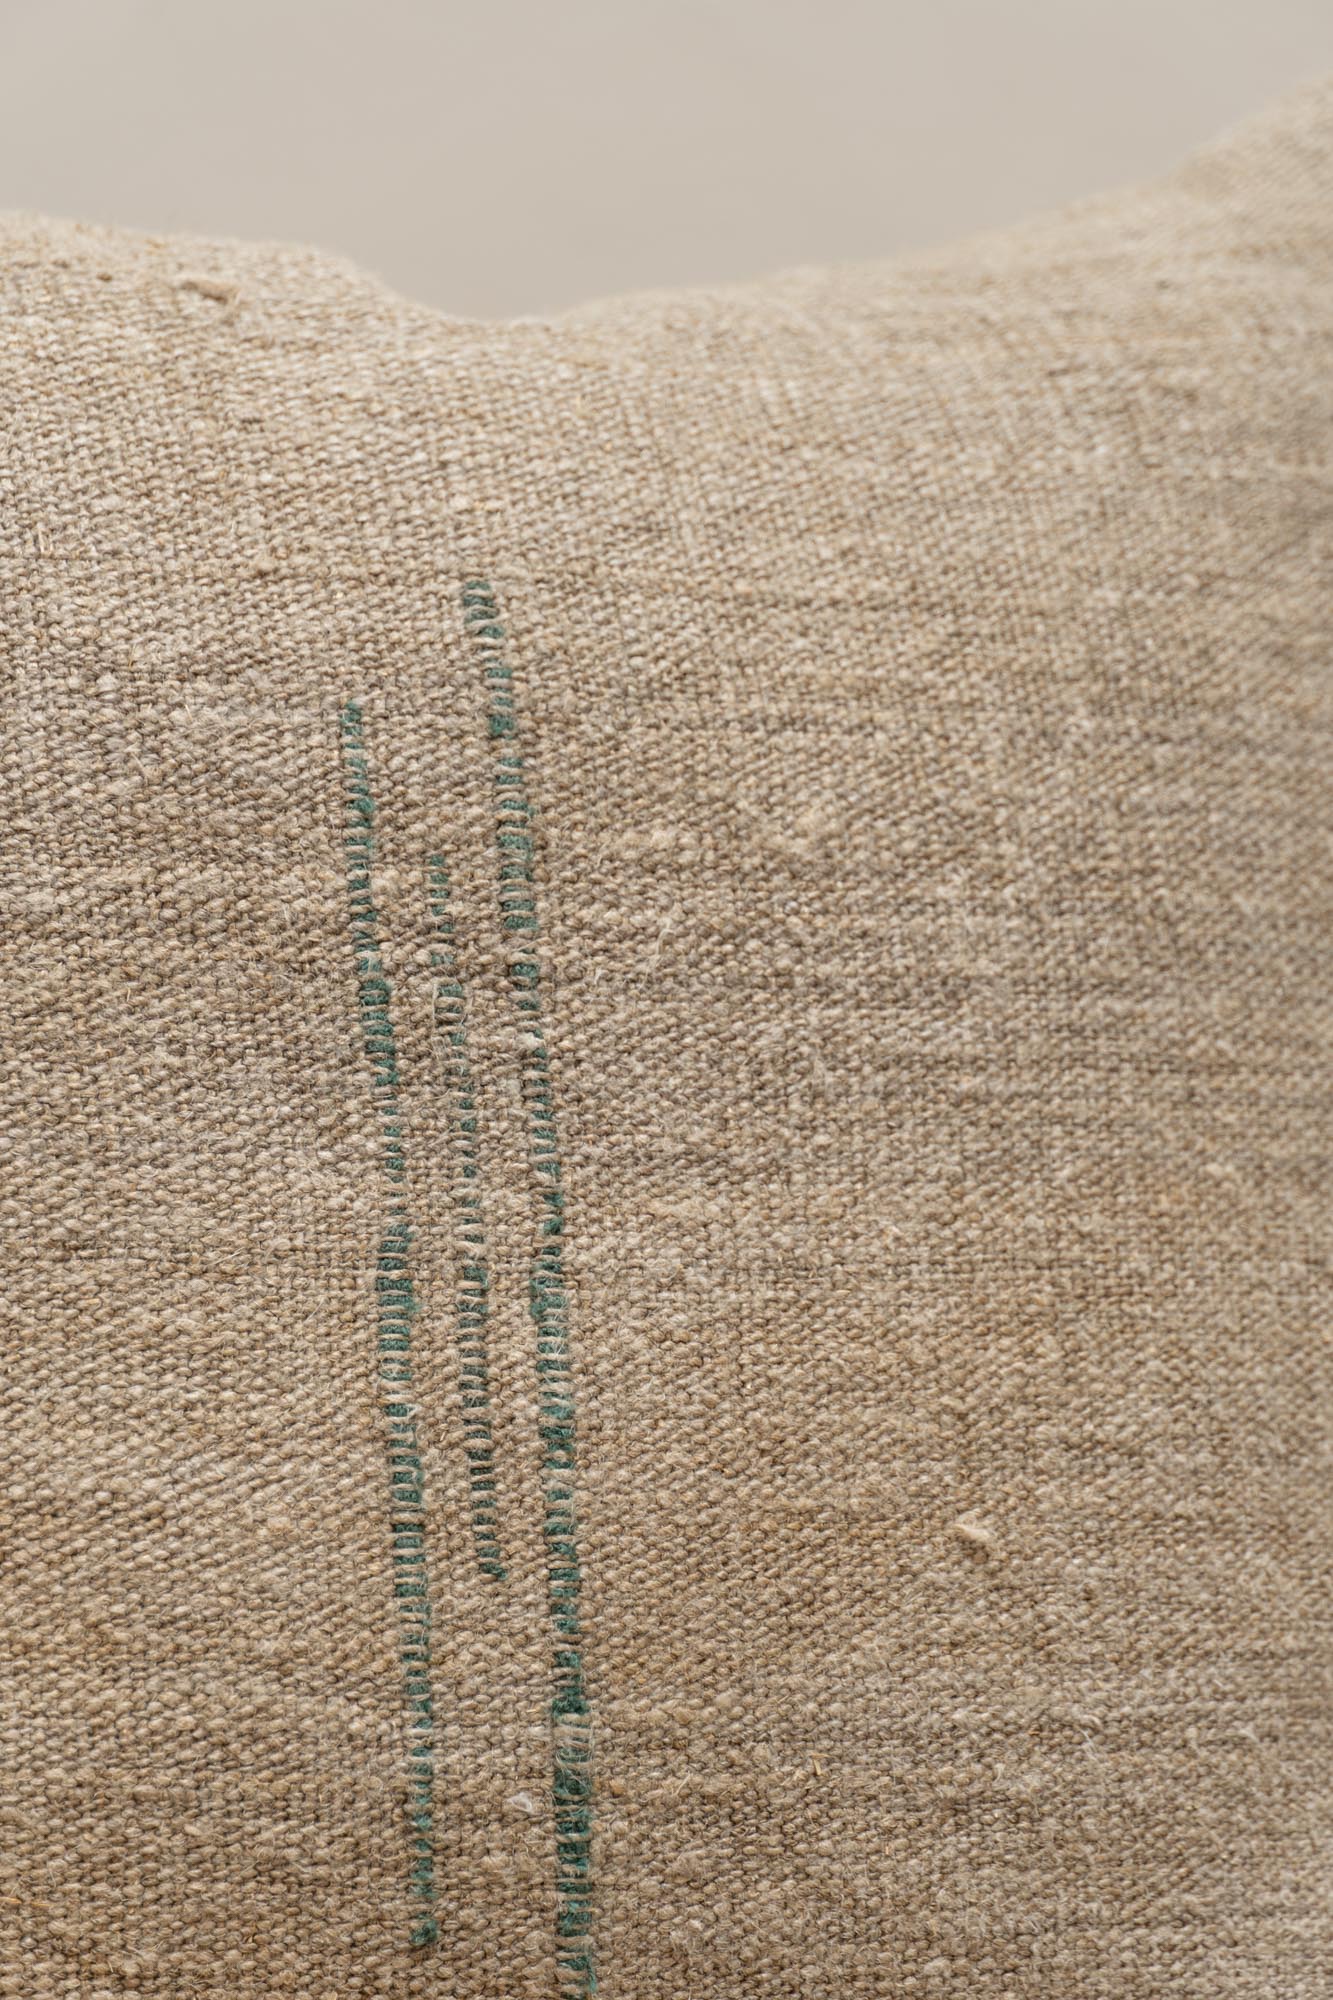 Close-up of the green threads detail in the antique hemp linen of the Vintage Collector's Cushion by Isabelle Yamamoto.